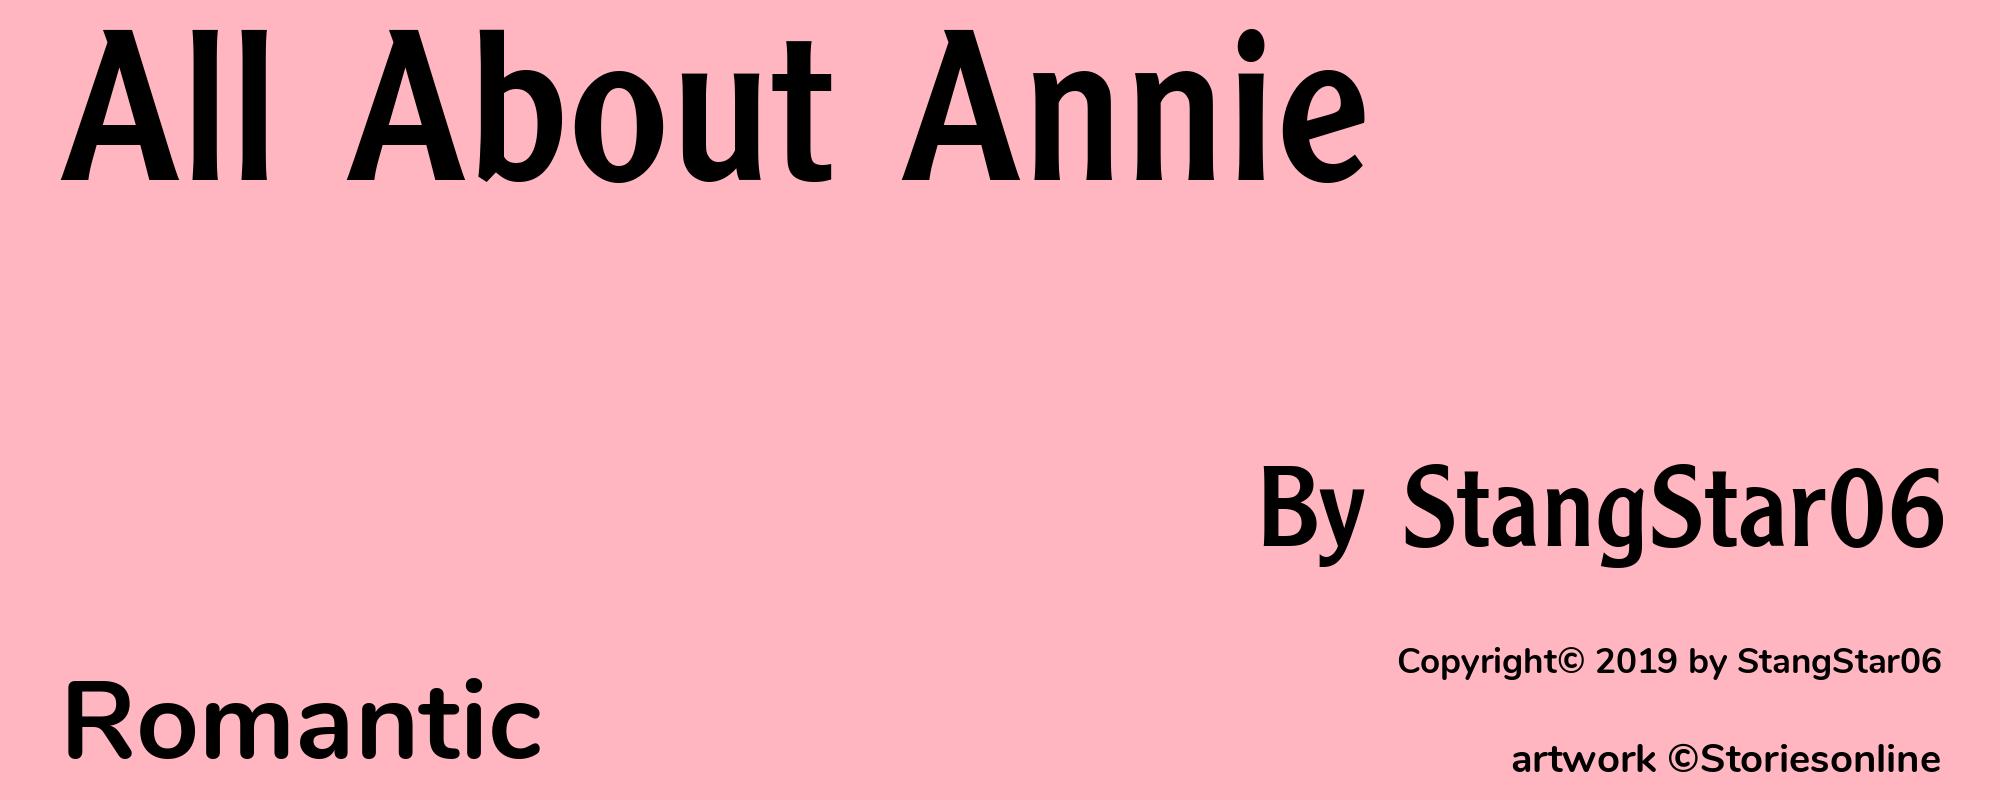 All About Annie - Cover